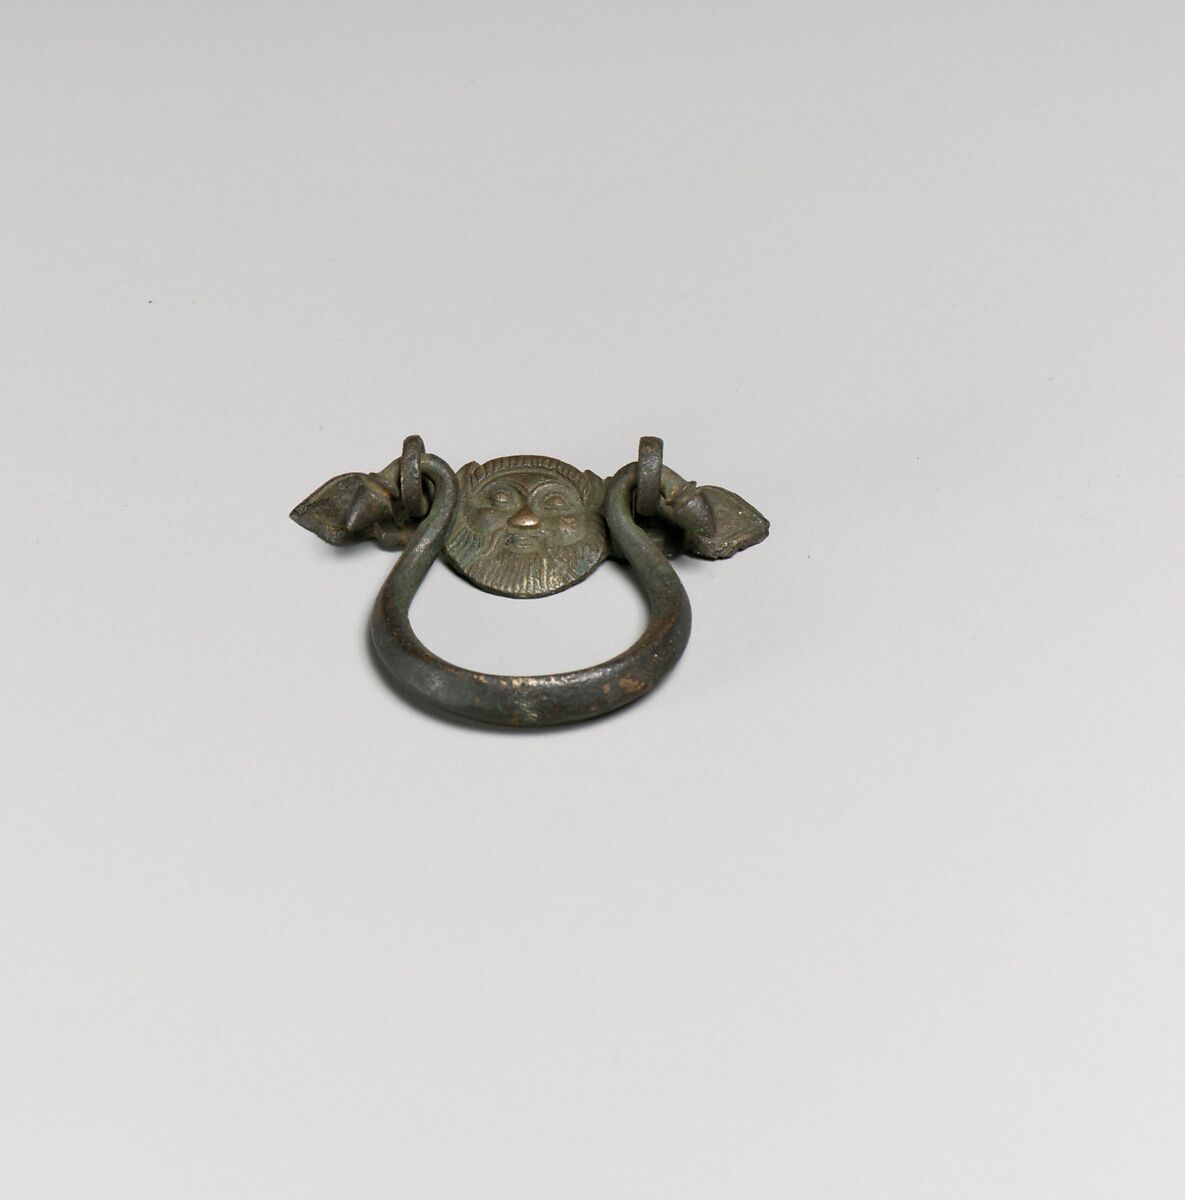 Handle with a head of a satyr, Bronze, Greek or Etruscan 